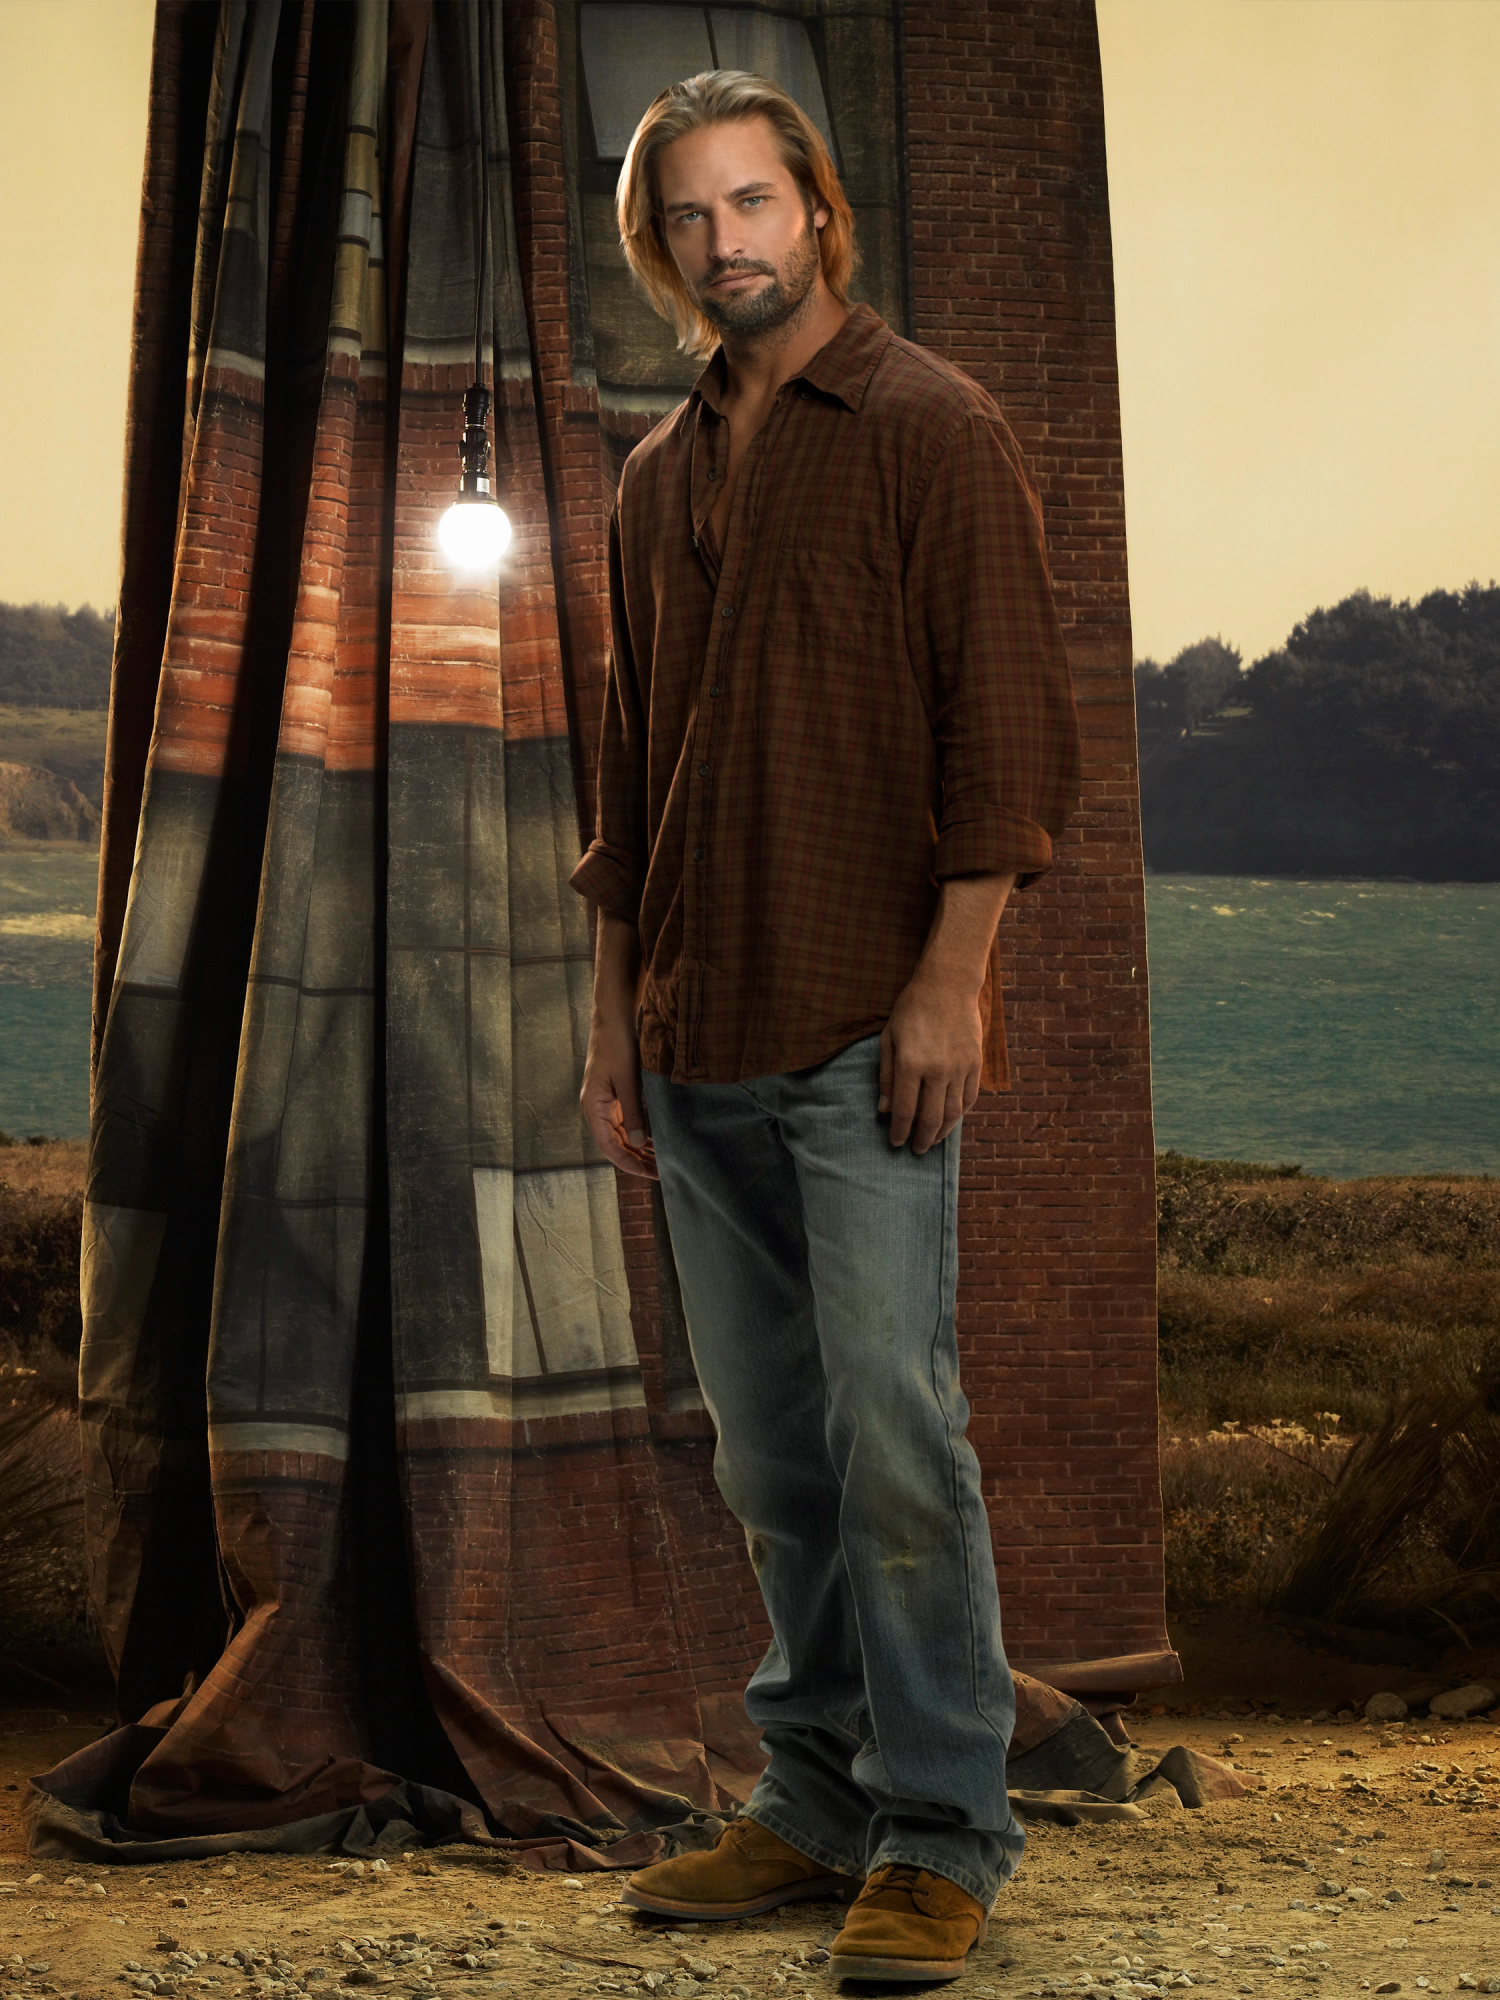 Lost, Josh Holloway as Sawyer James Ford